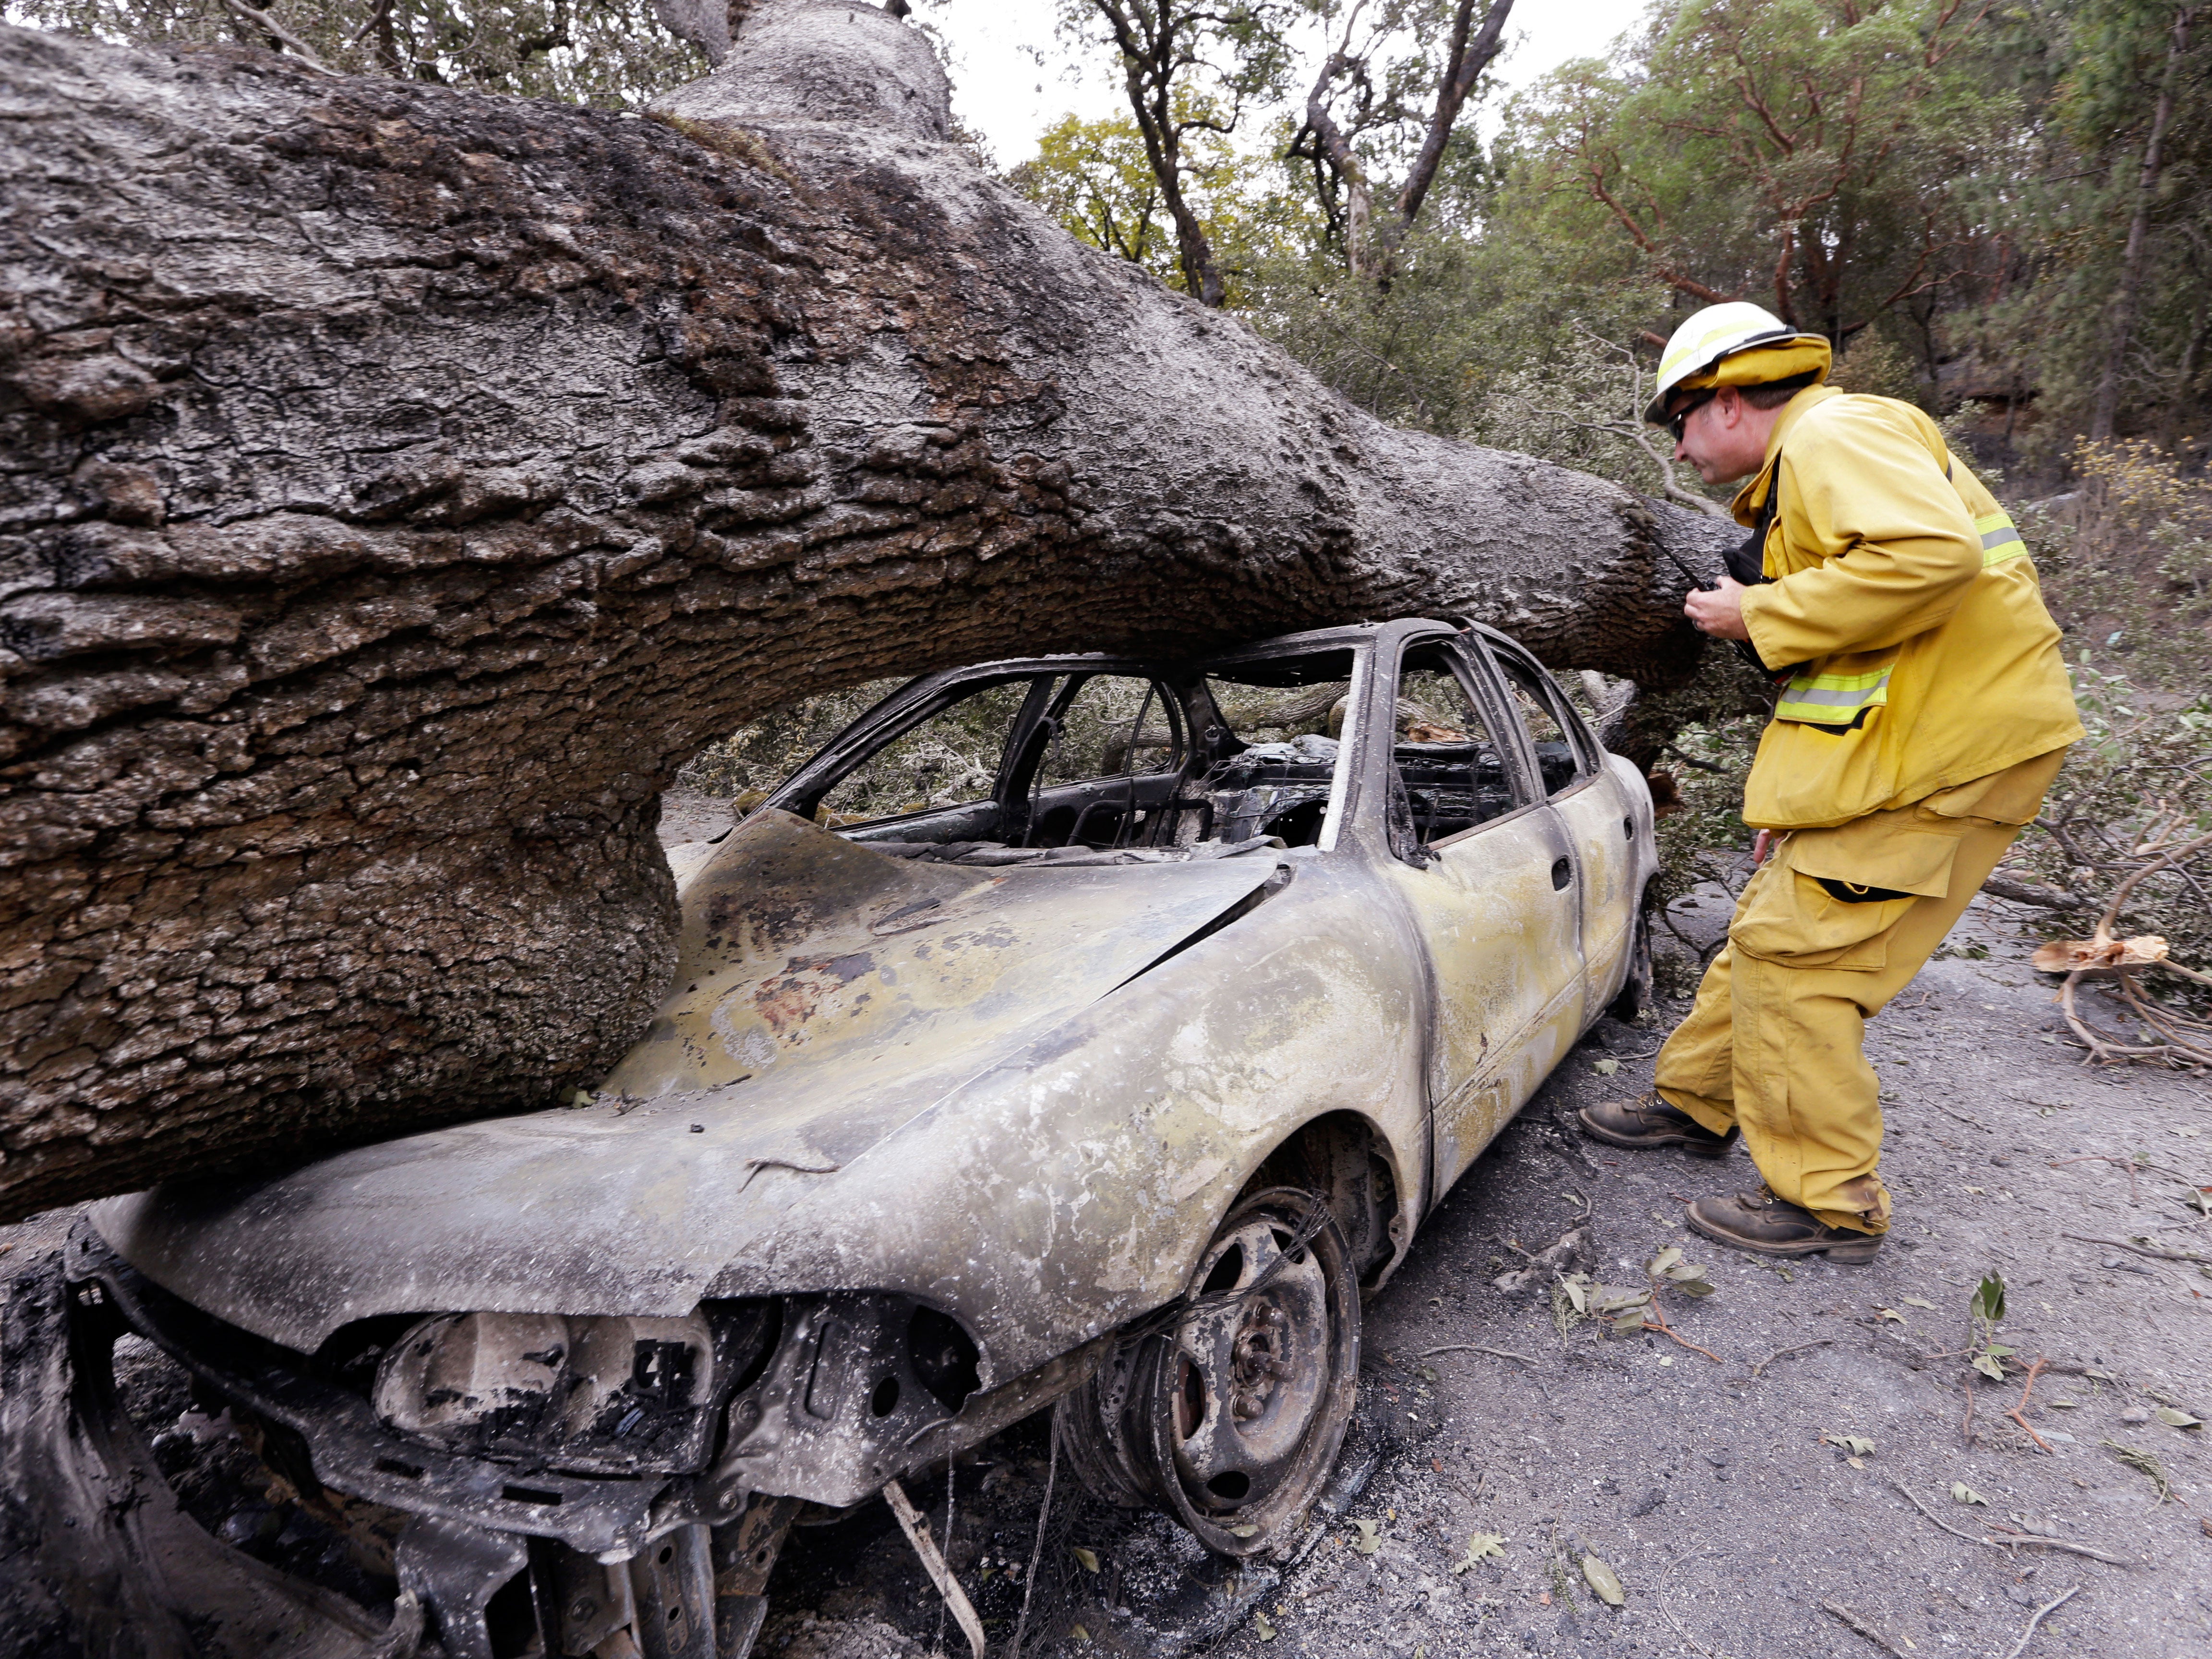 A firefighter looks into a car hit by a fallen tree in the Valley wildfire